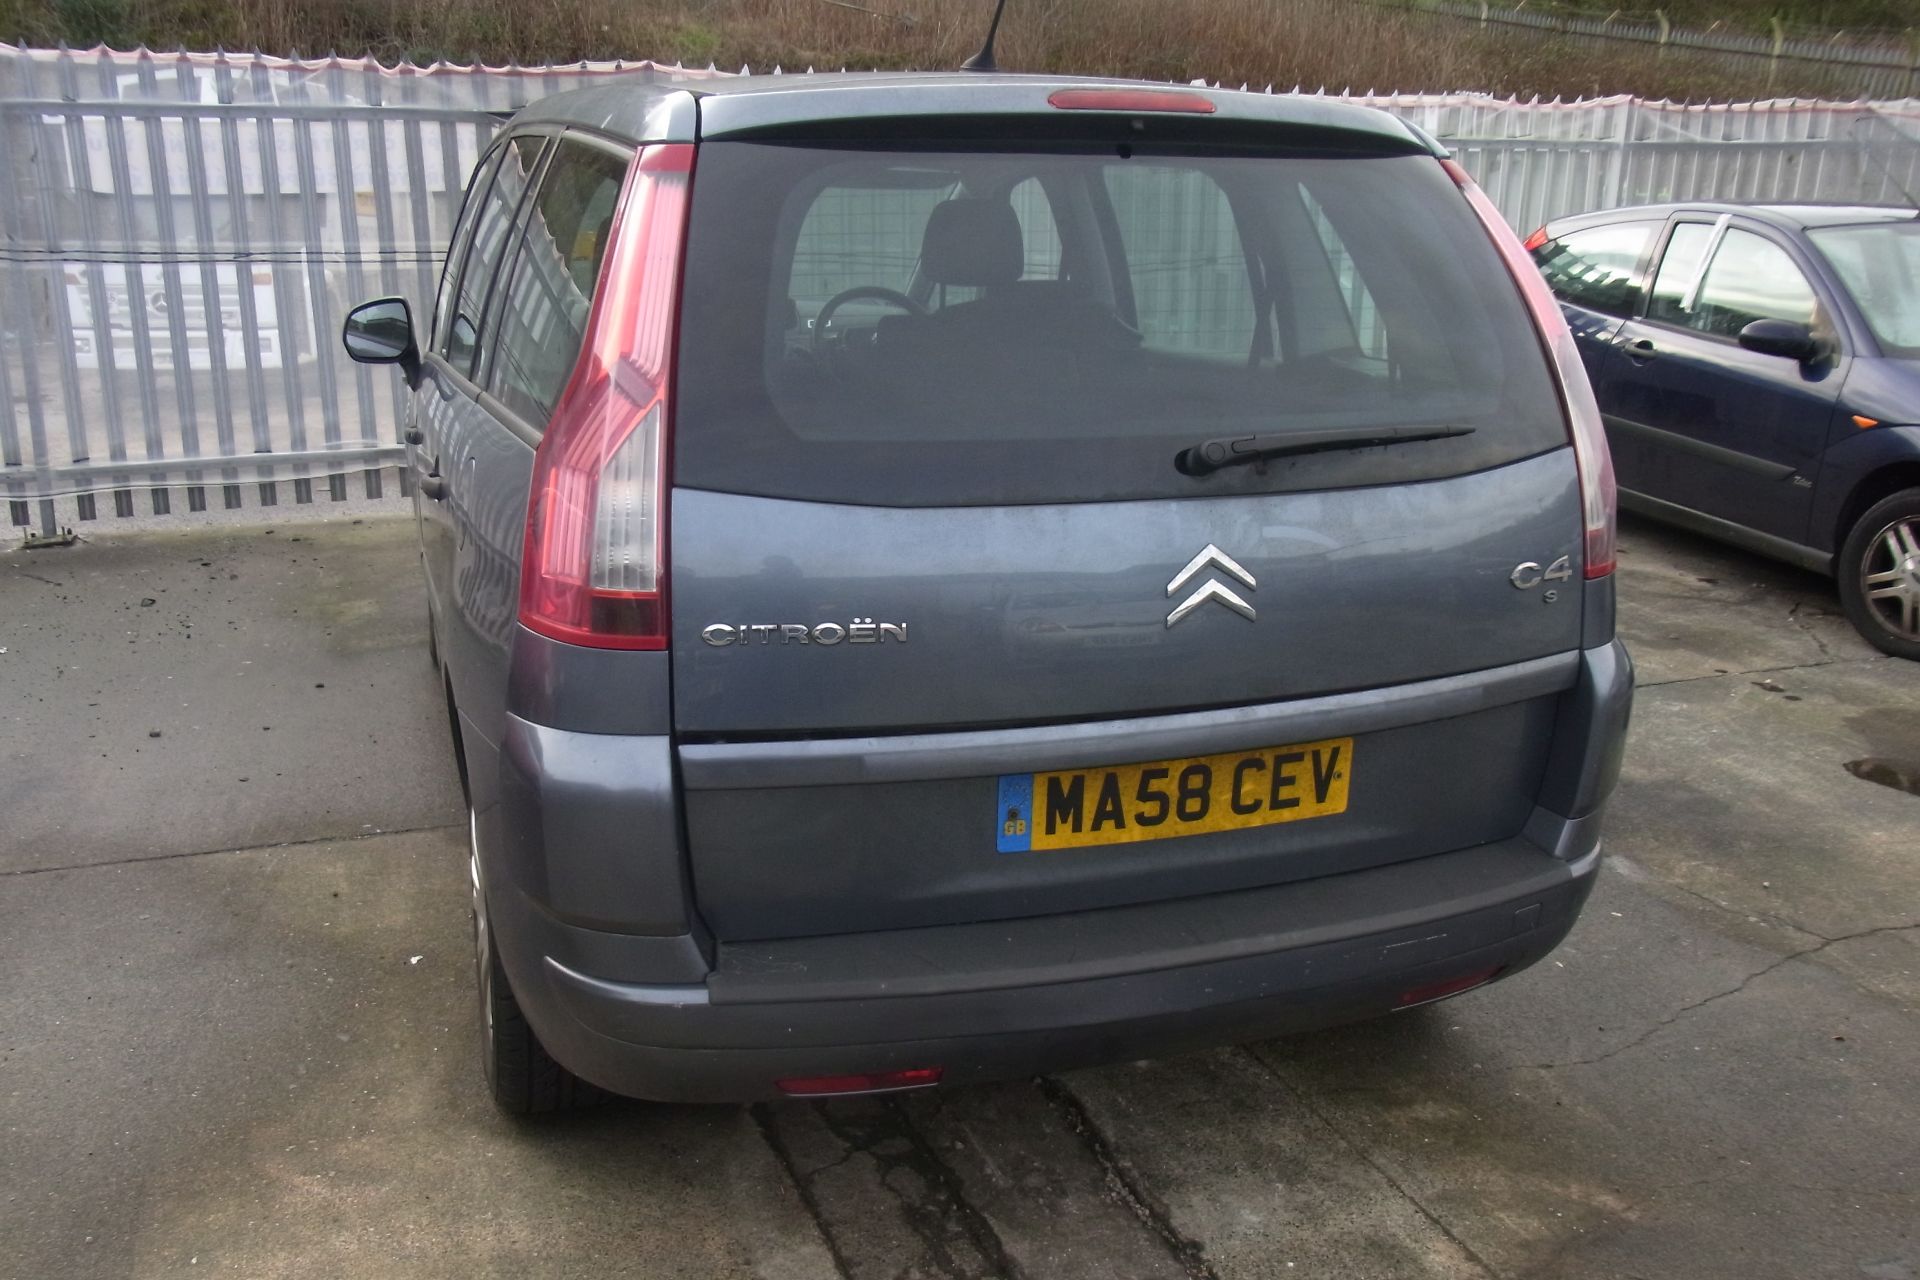 MA58 CEV - Citroen C4 Grand Picasso SX HDI - with V5 - No Keys - Image 3 of 3